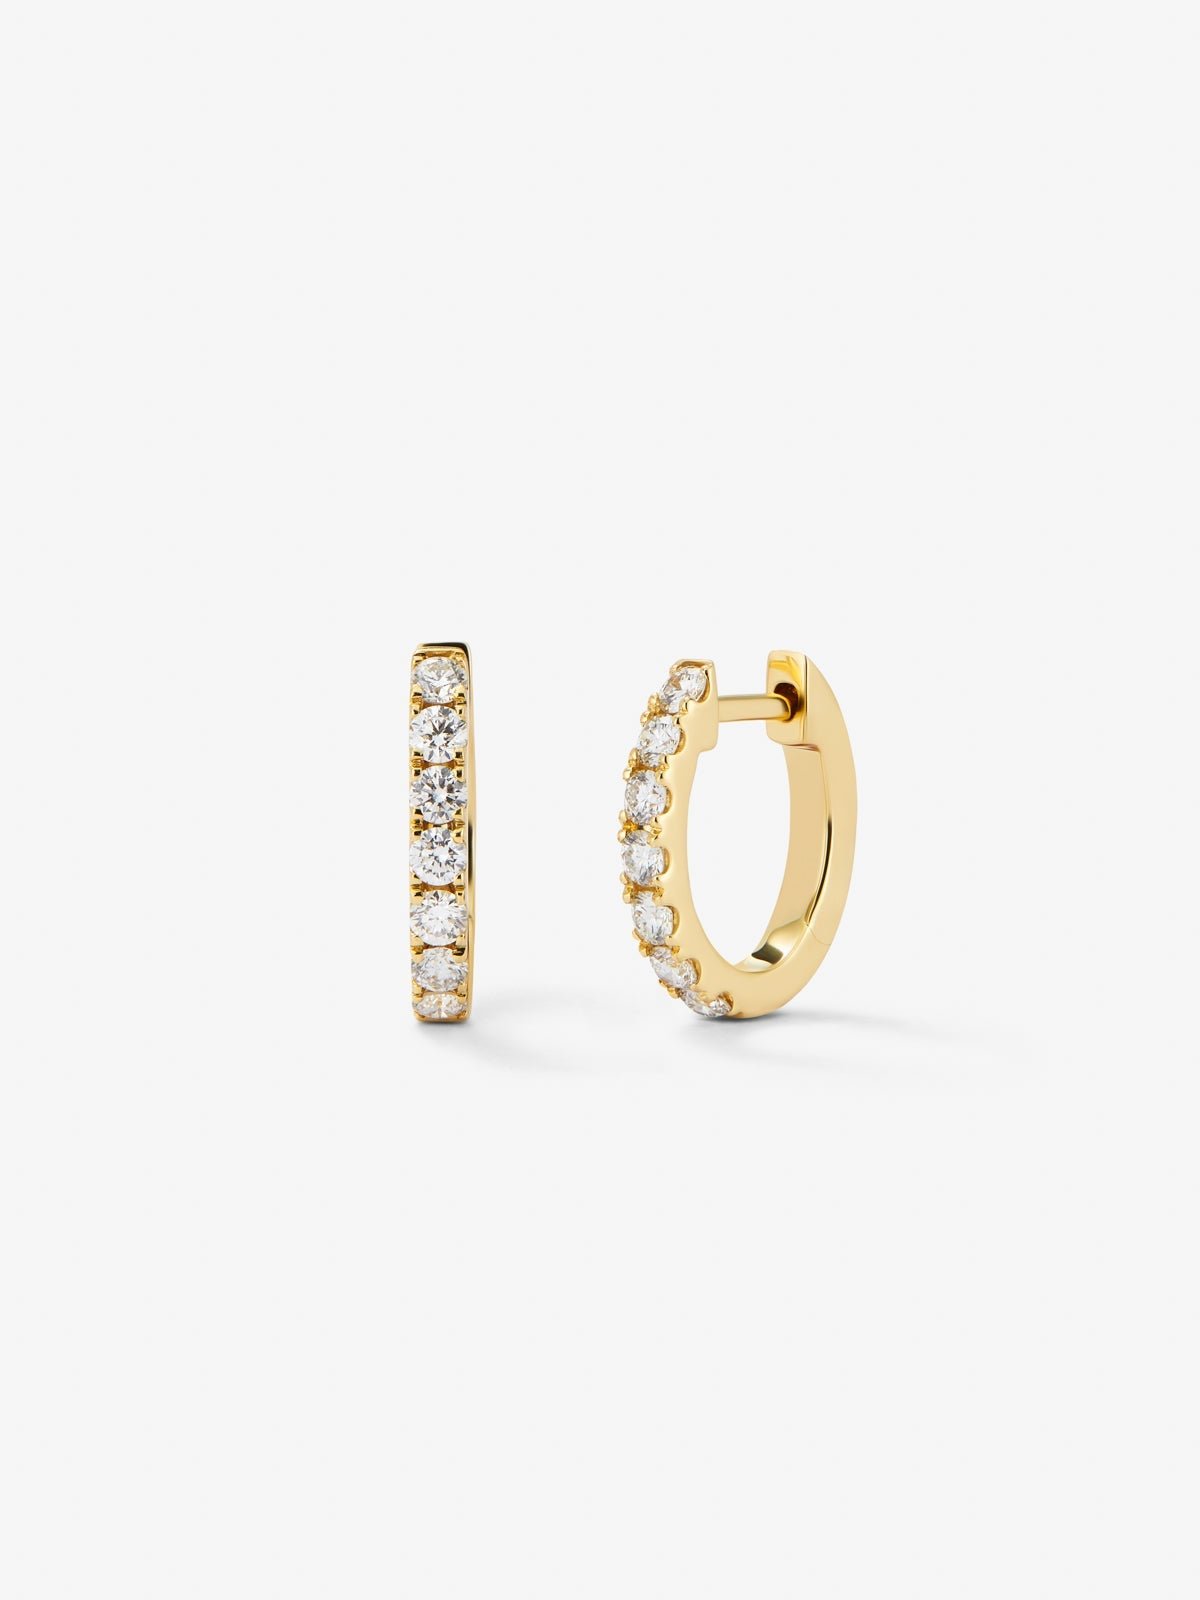 18K yellow gold hoop earrings with 14 brilliant-cut white diamonds with a total of 0.39 cts